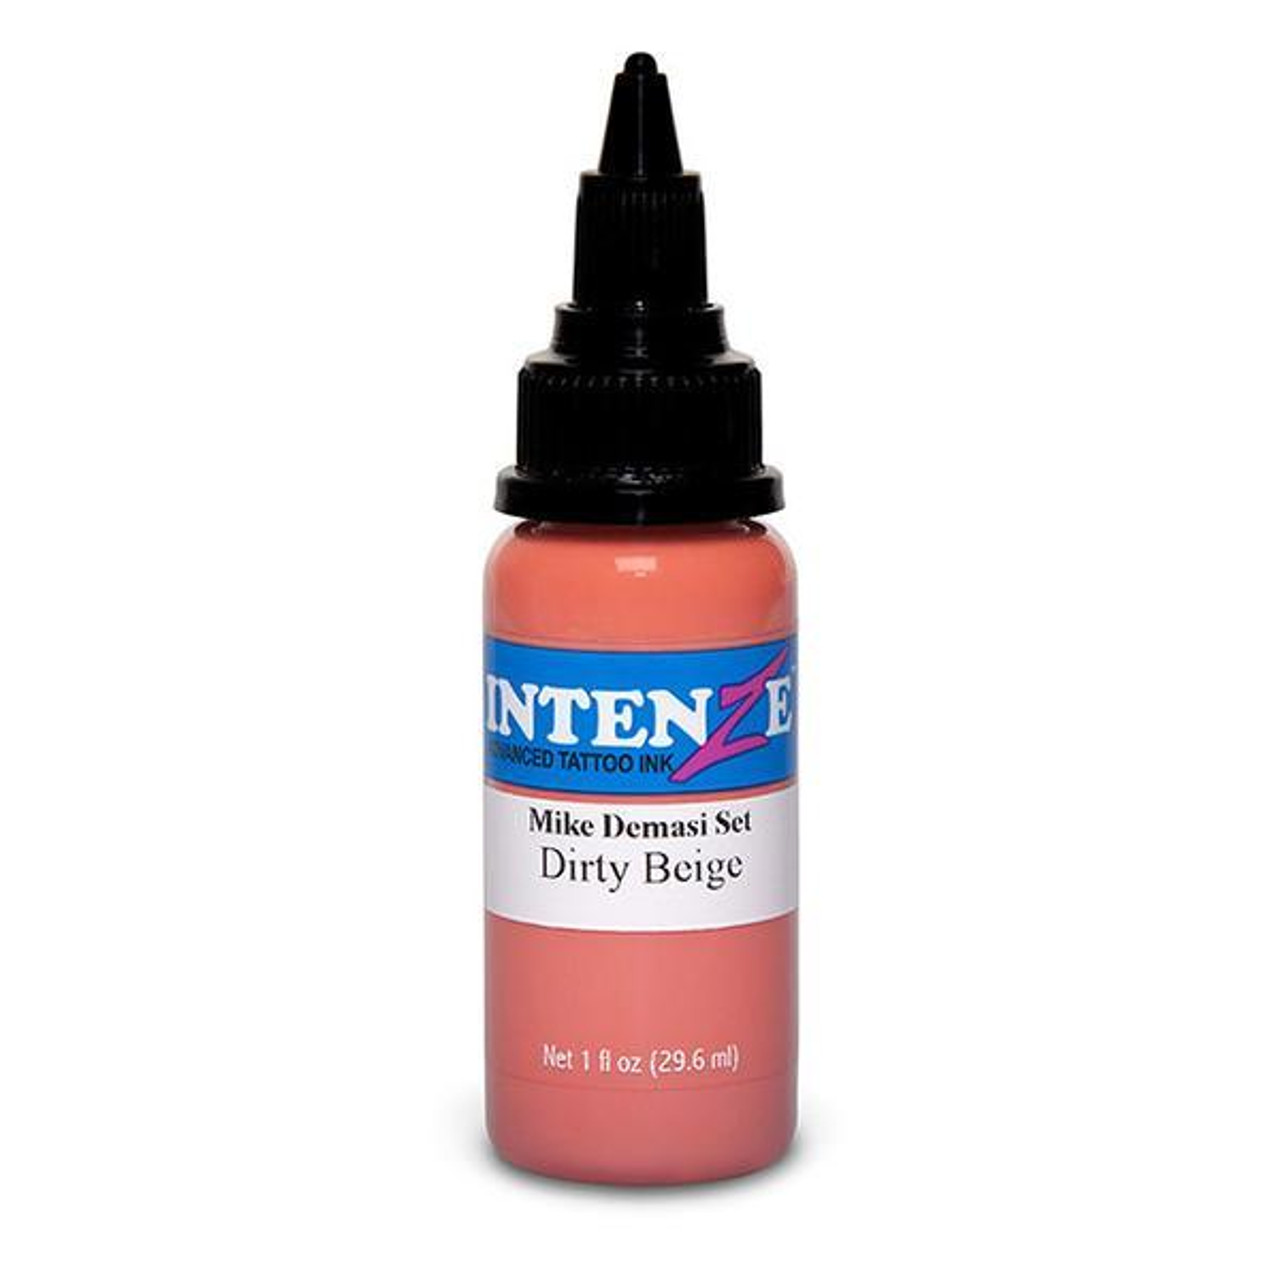 Intenze Dirty Beige Tattoo Ink - 1oz. Mike Demasi Color Portrait Series Exp 2/28/26